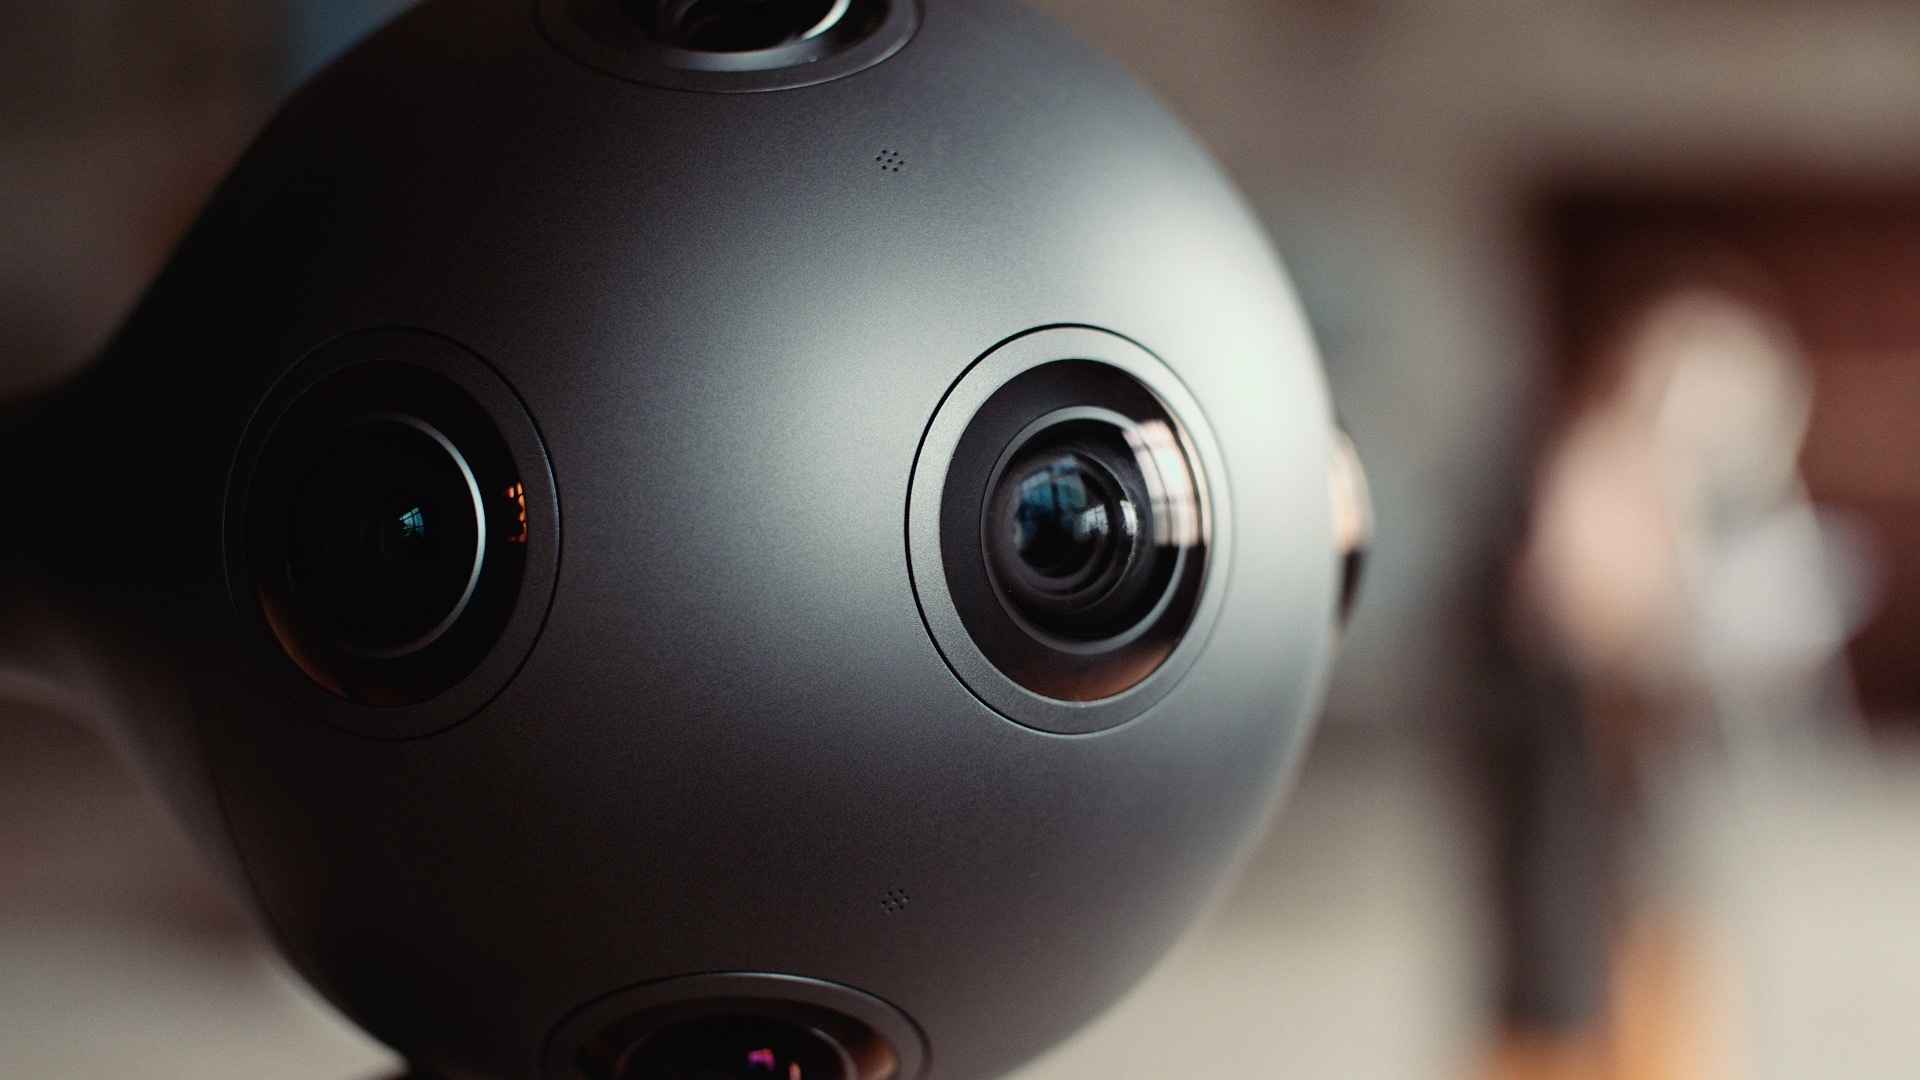 Nokia's next move is VR with this $60,000 OZO camera